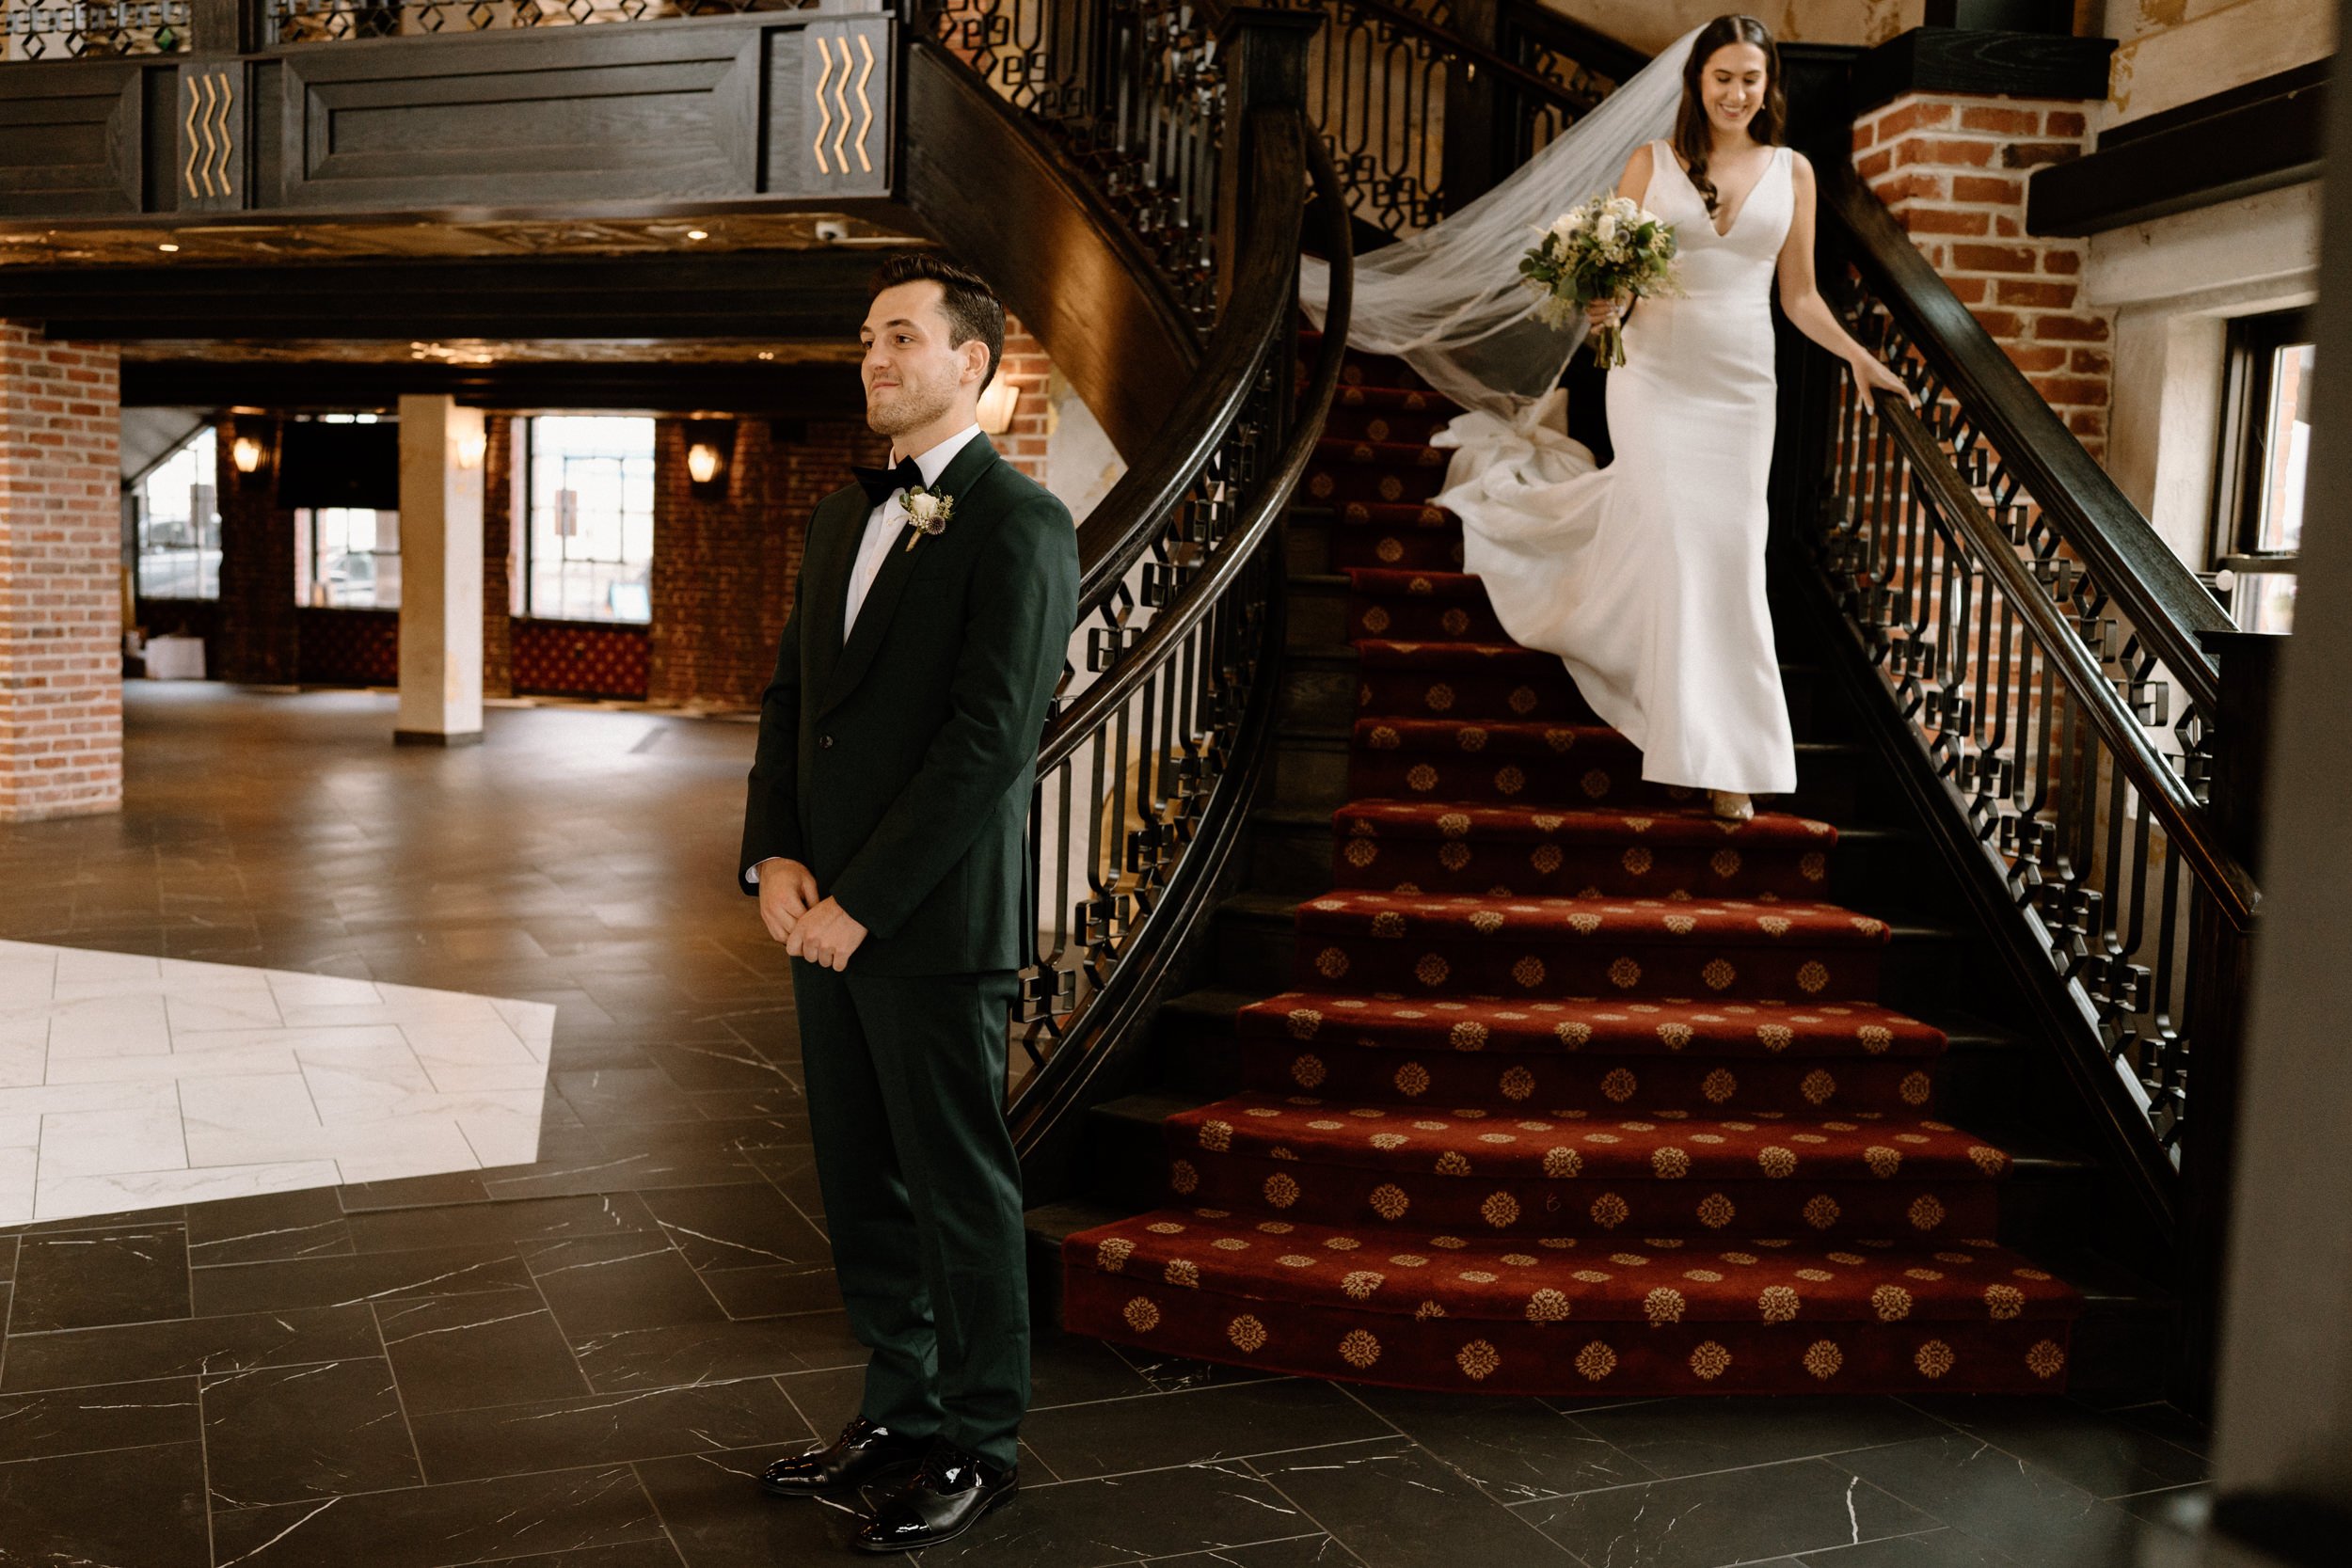 The bride walks down the staircase toward the waiting groom at Ironworks in Denver, CO